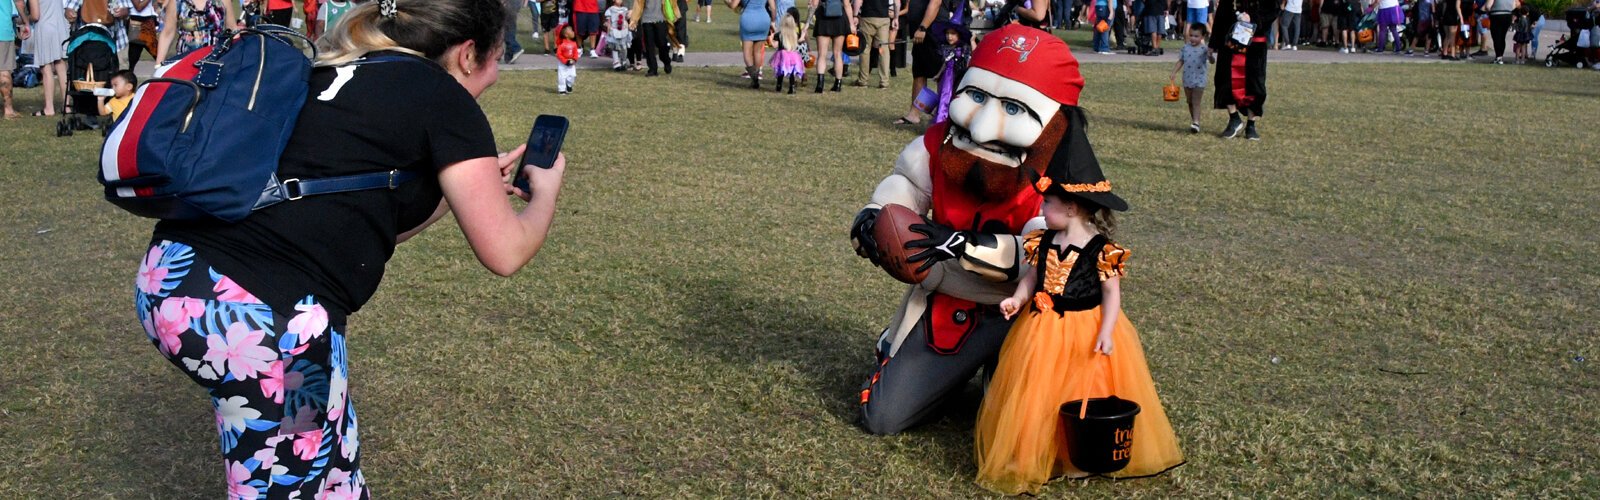  A caricatured Tampa Bay Buccaneer mascot serves as a prop for a Halloween portrait.